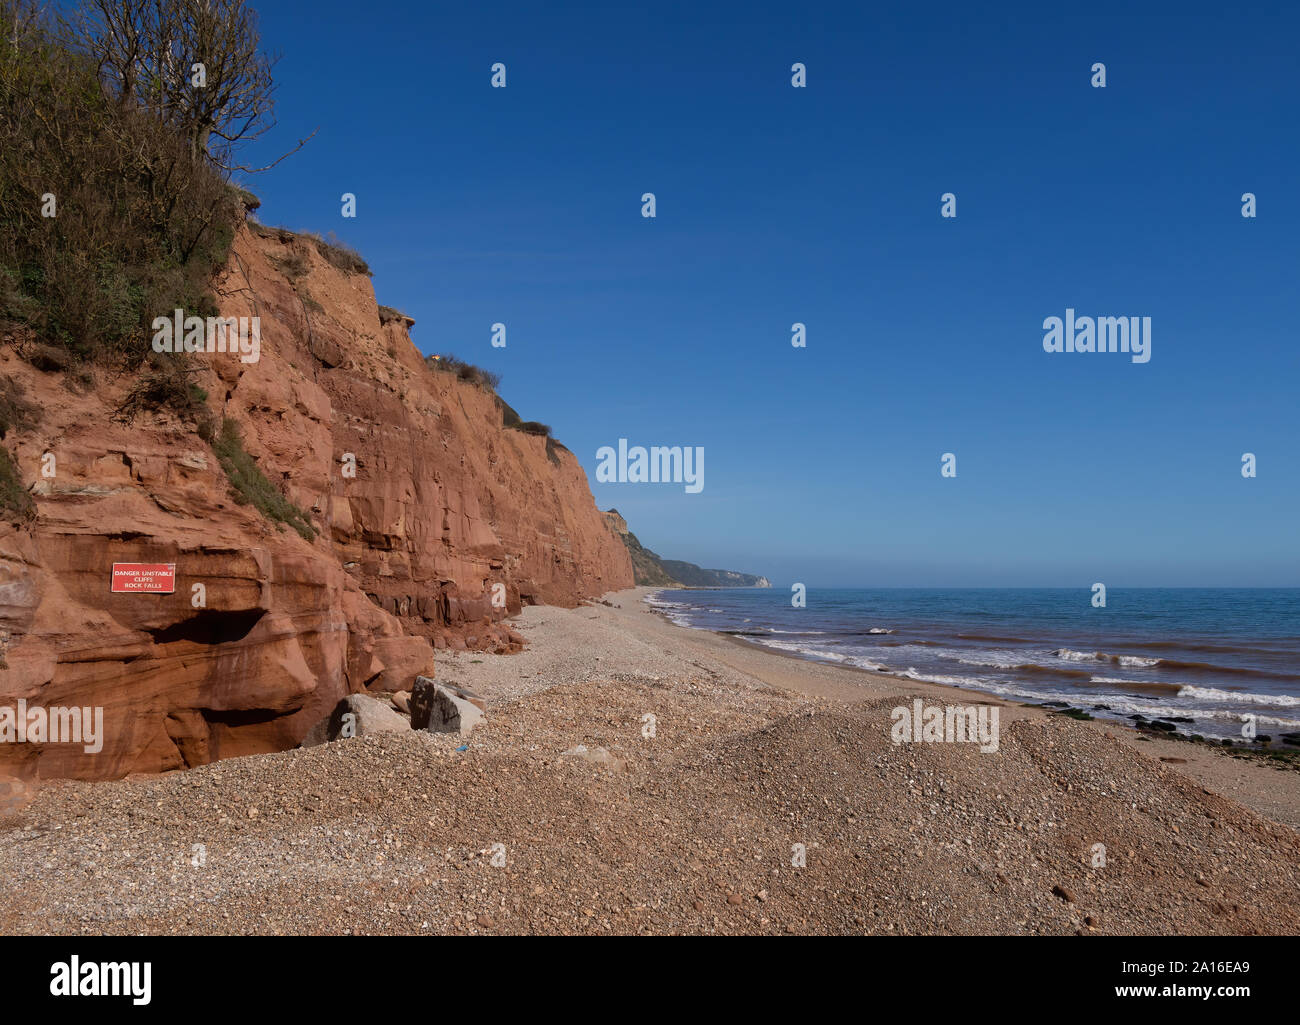 The famous Jurassic Coast red cliffs at Sidmouth, Devon, England. Looking East from Sidmouth Beach with warning of danger of landslides. Stock Photo